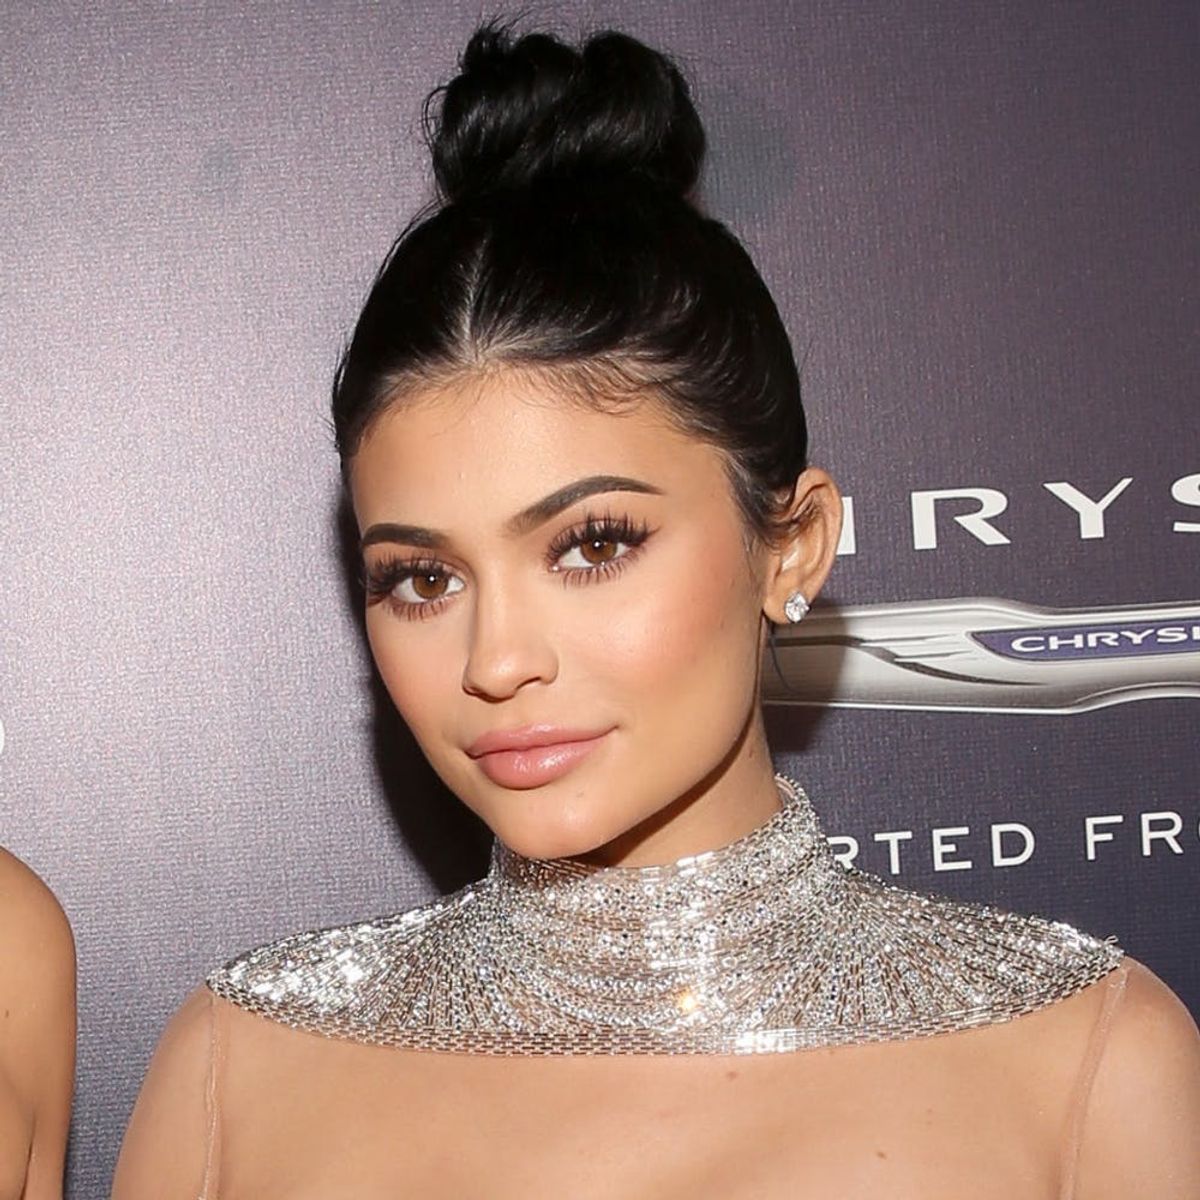 Kylie Jenner Is Slaying the Coachella Game With Bright AF Highlighter Hair